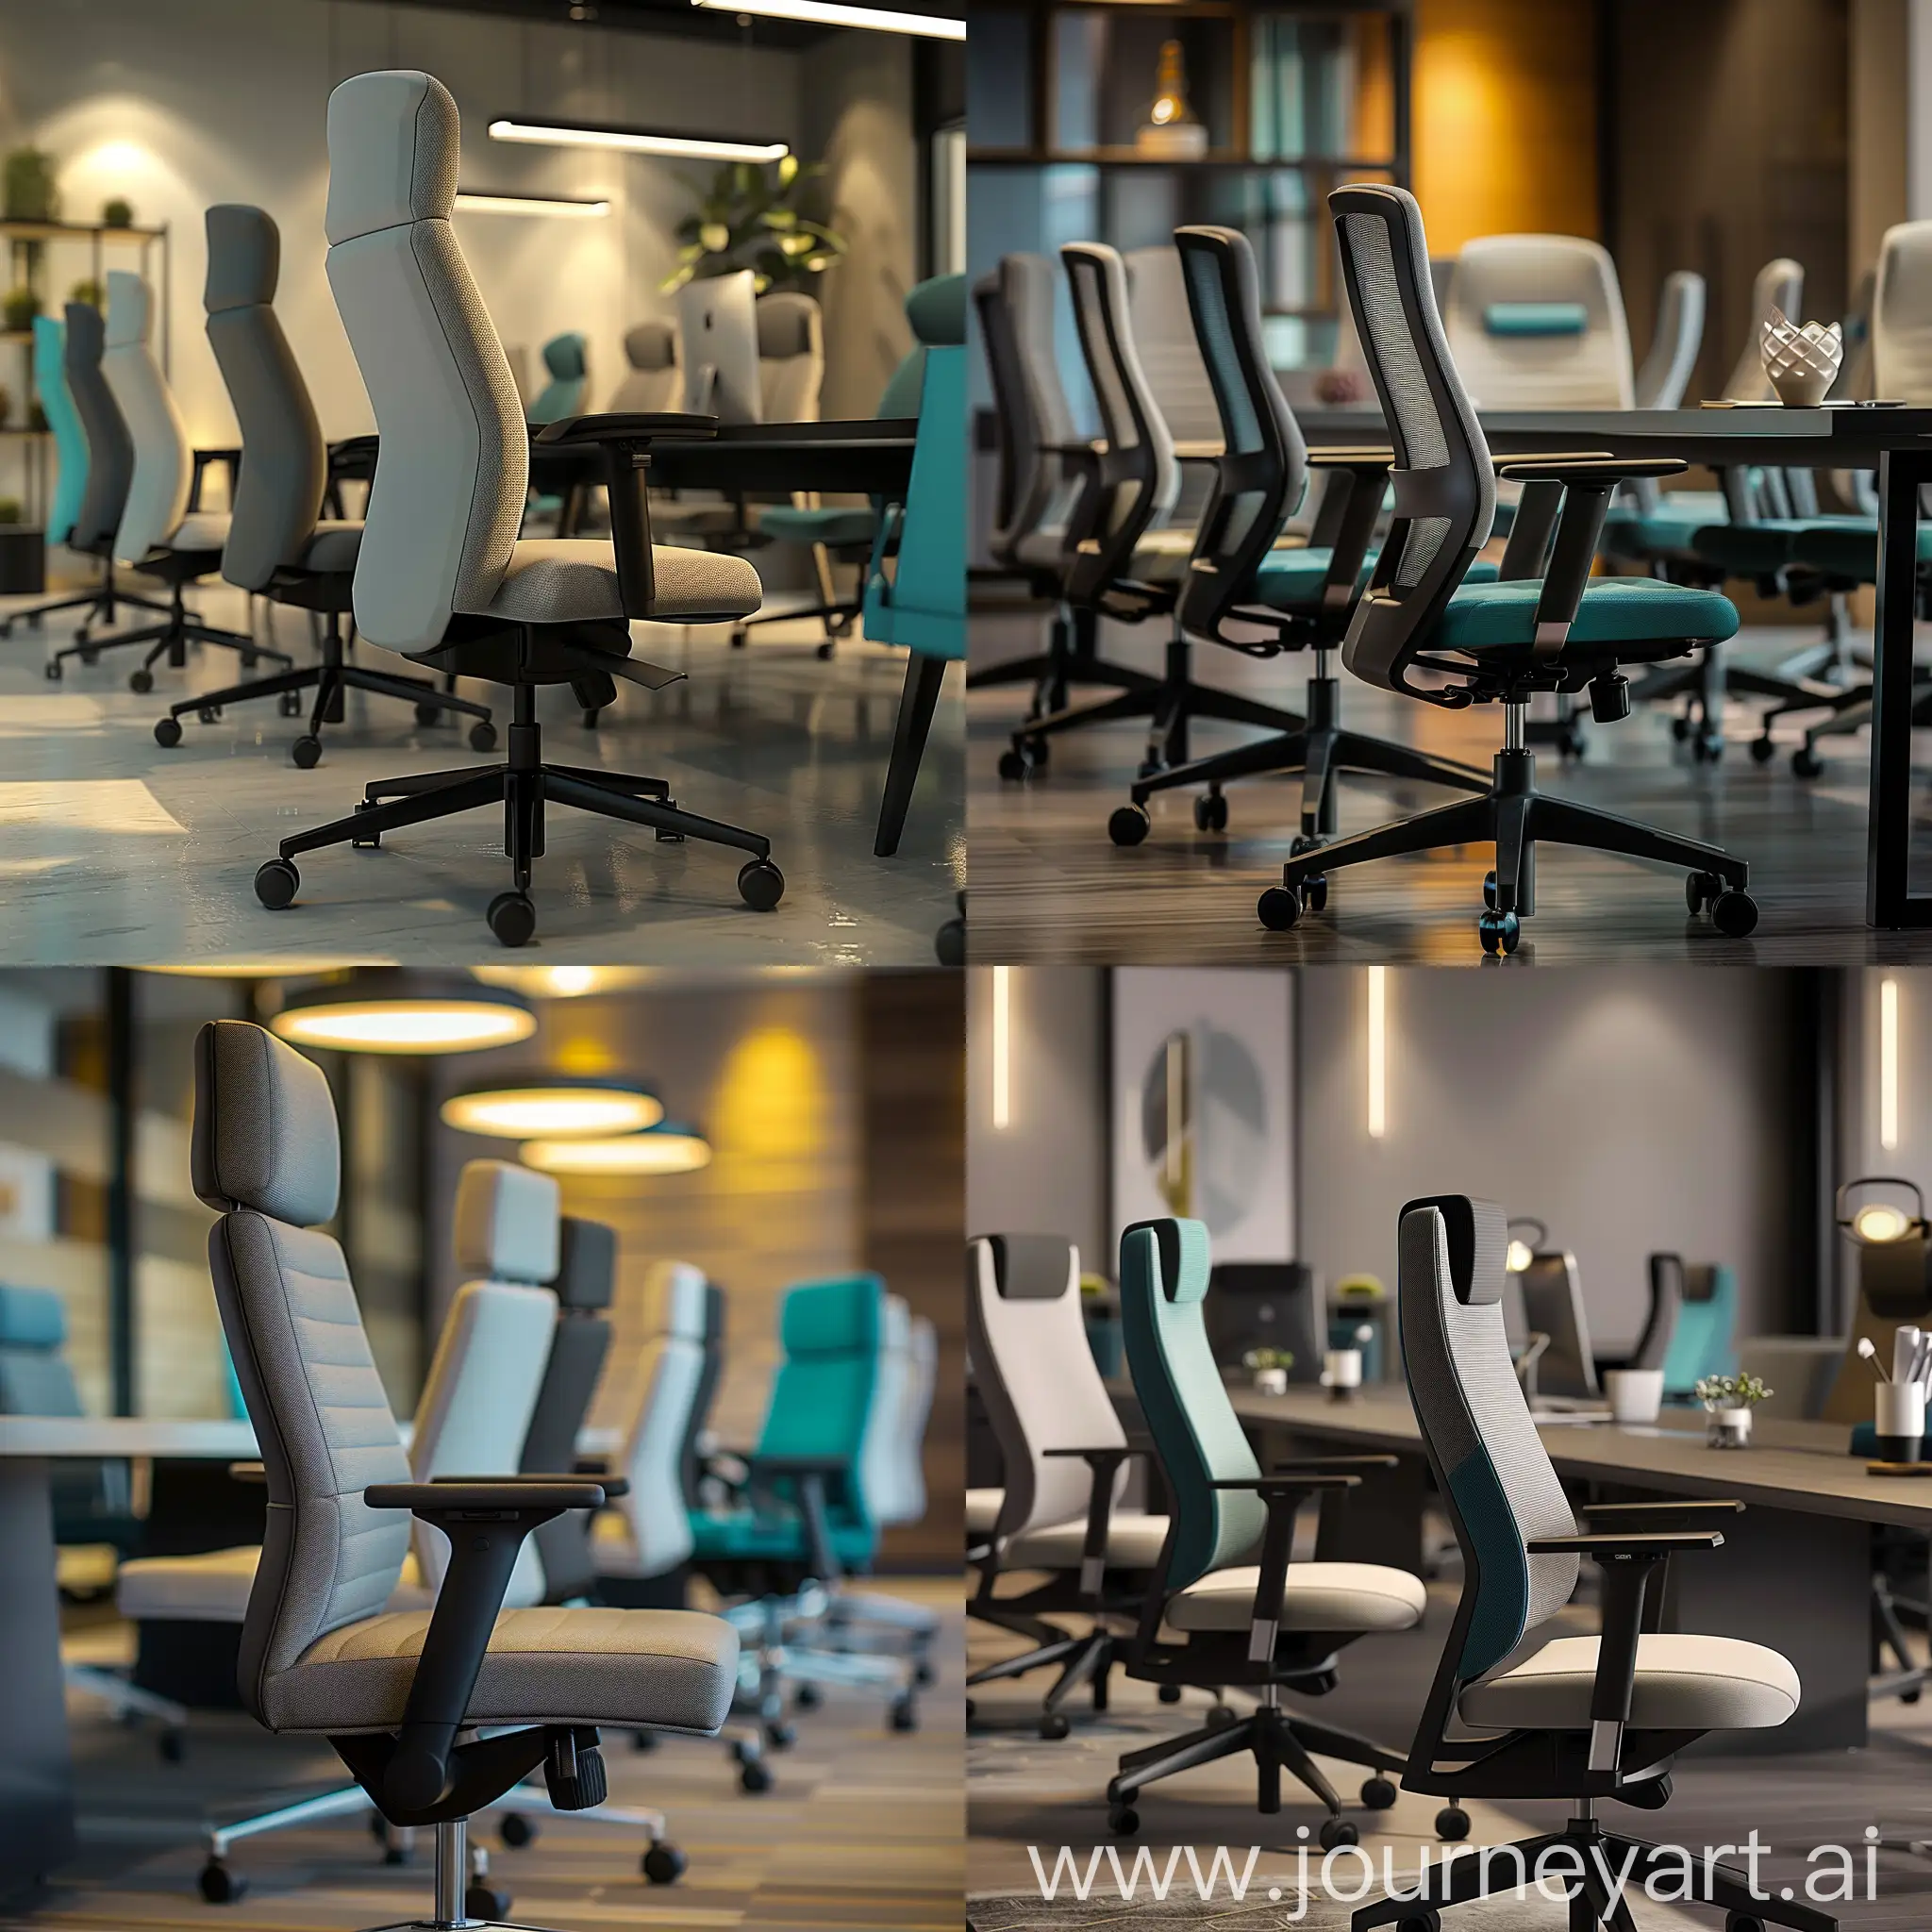 Contemporary-Ergonomic-Chairs-in-Bright-Modern-Office-Setting